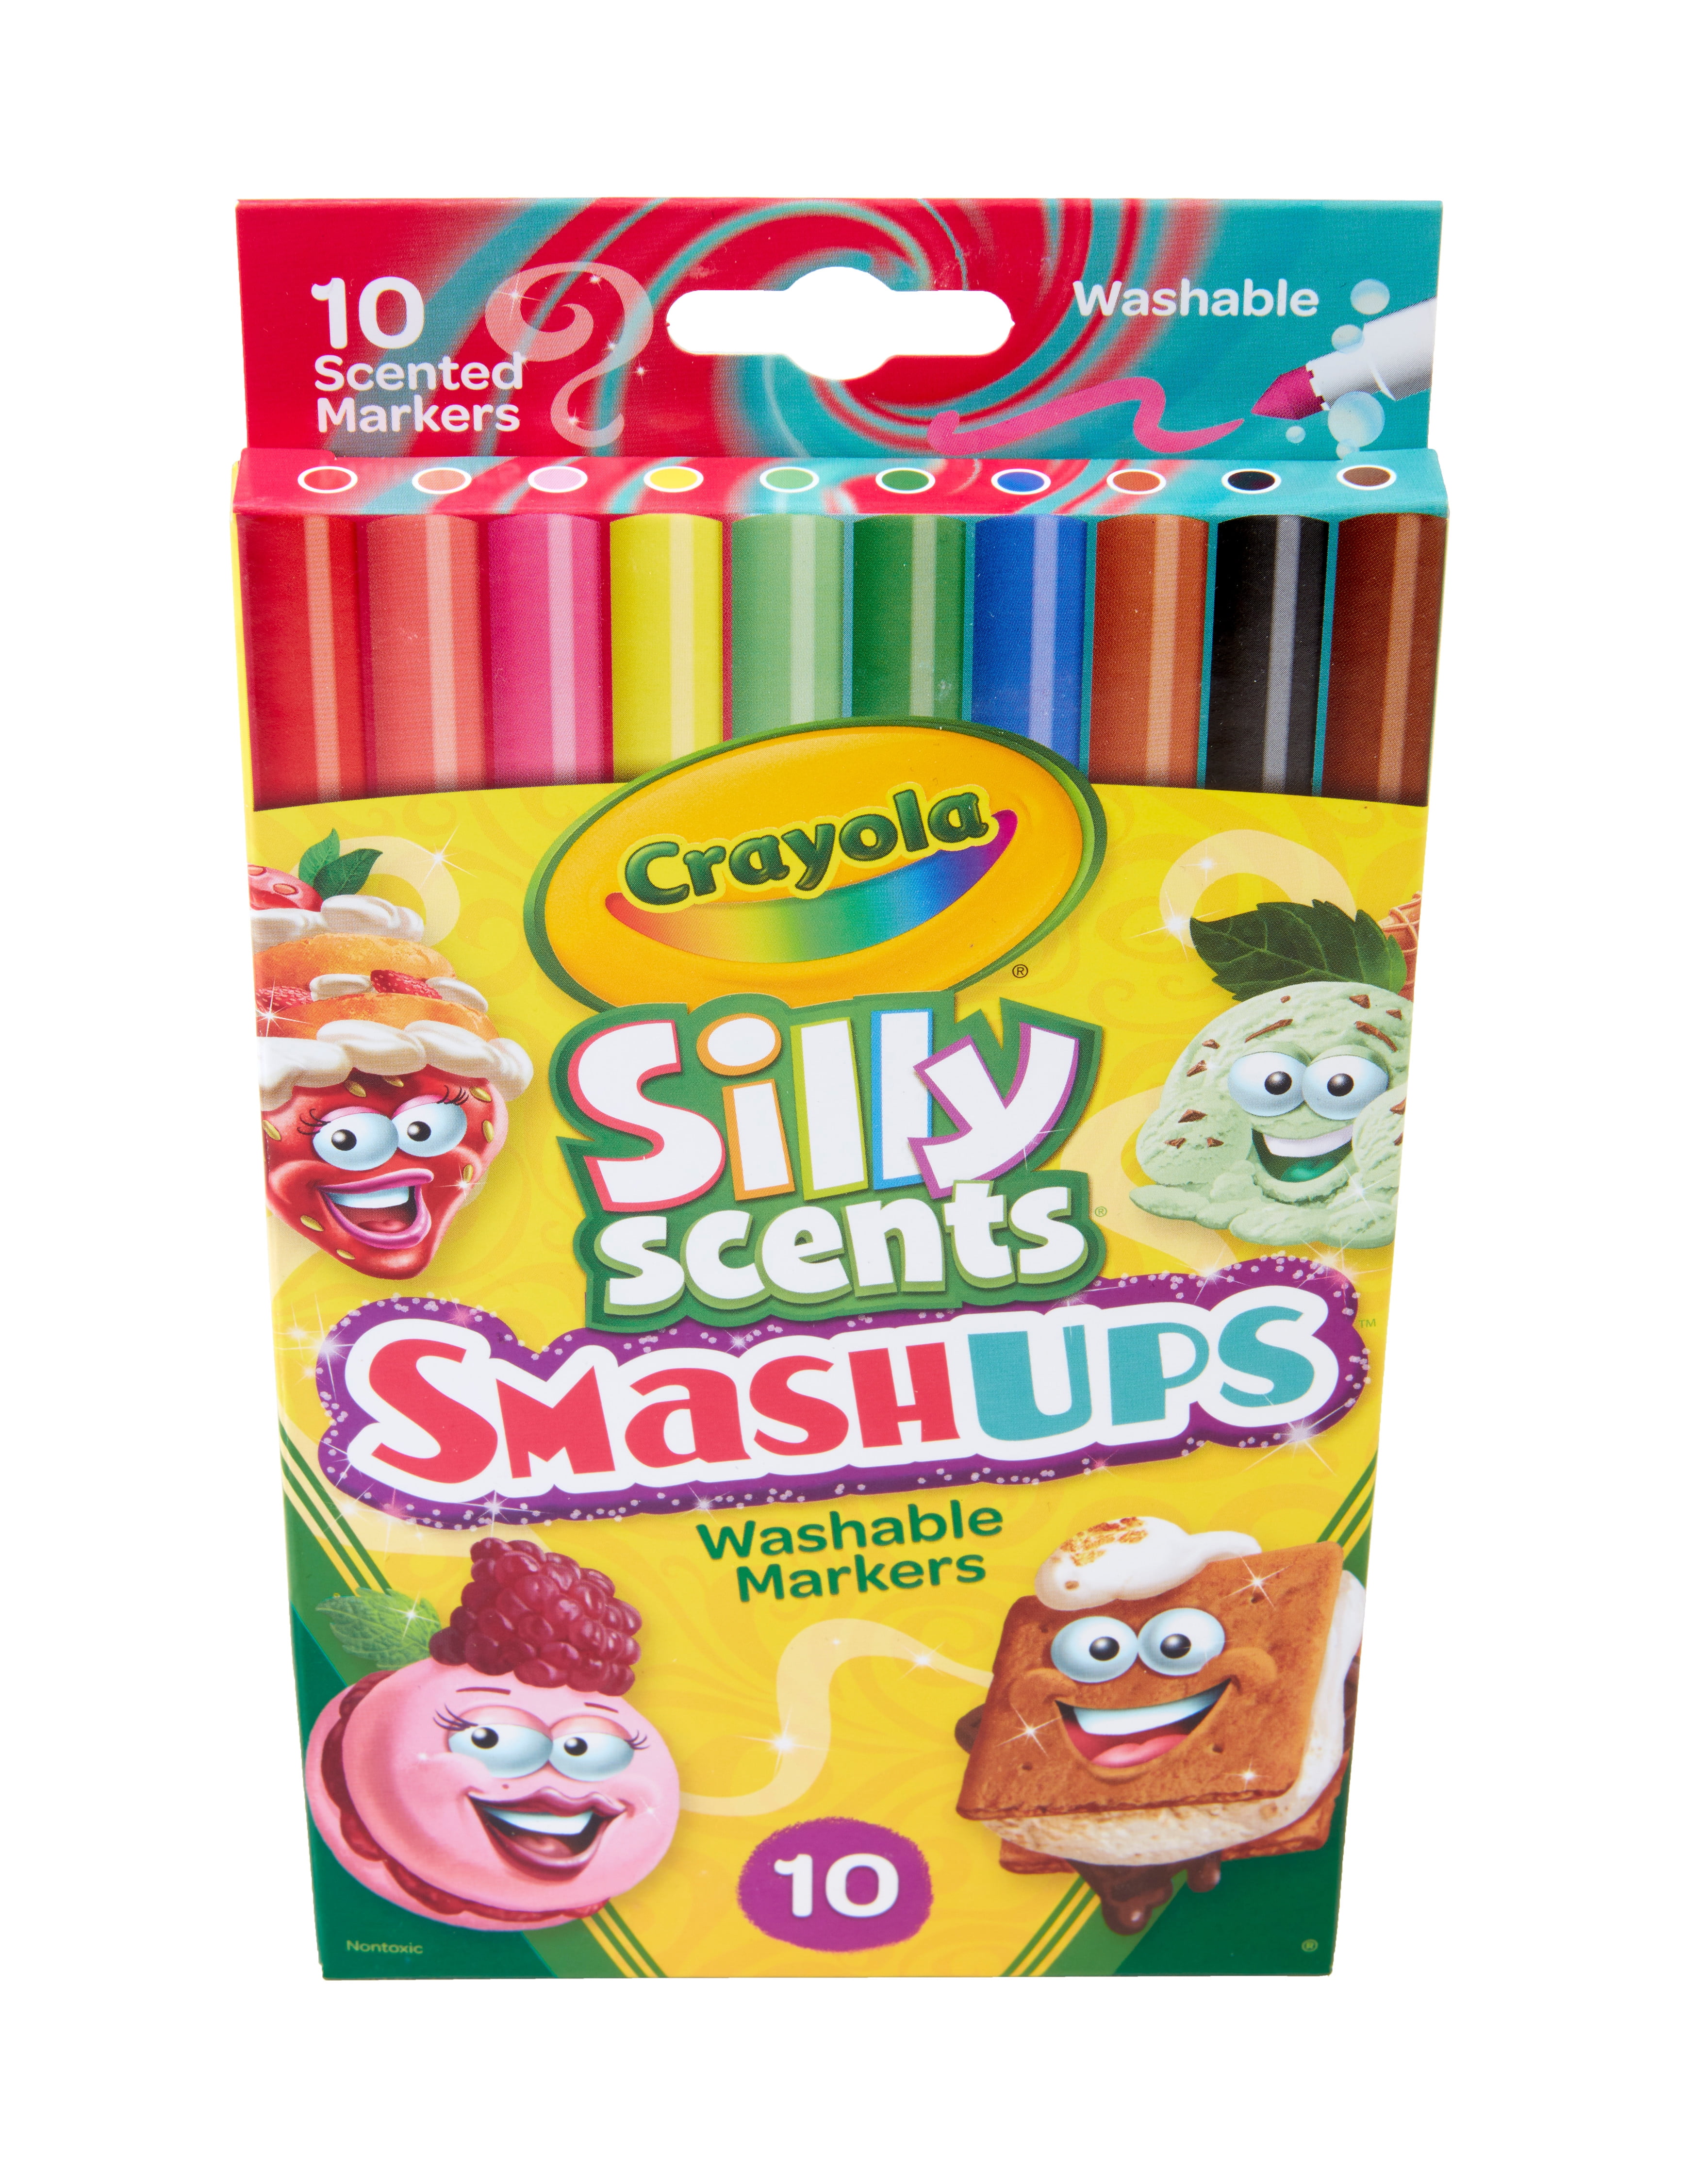  Crayola Silly Scents Washable Scented Markers, 10